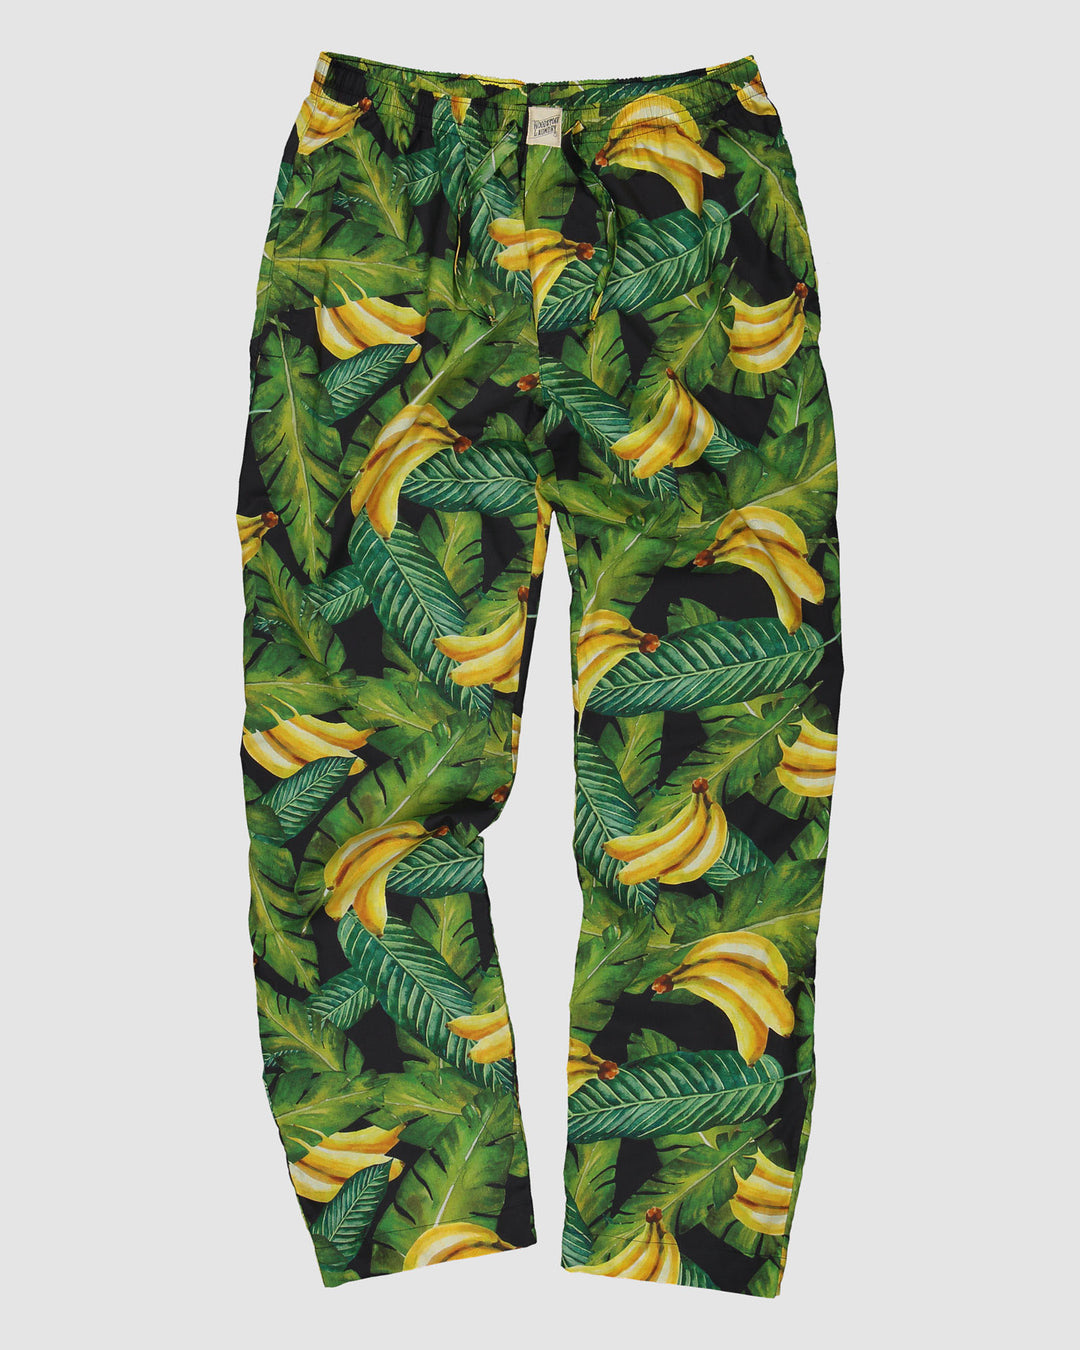 Mens Lounge Pants Bananas On Leaves Front - Woodstock Laundry